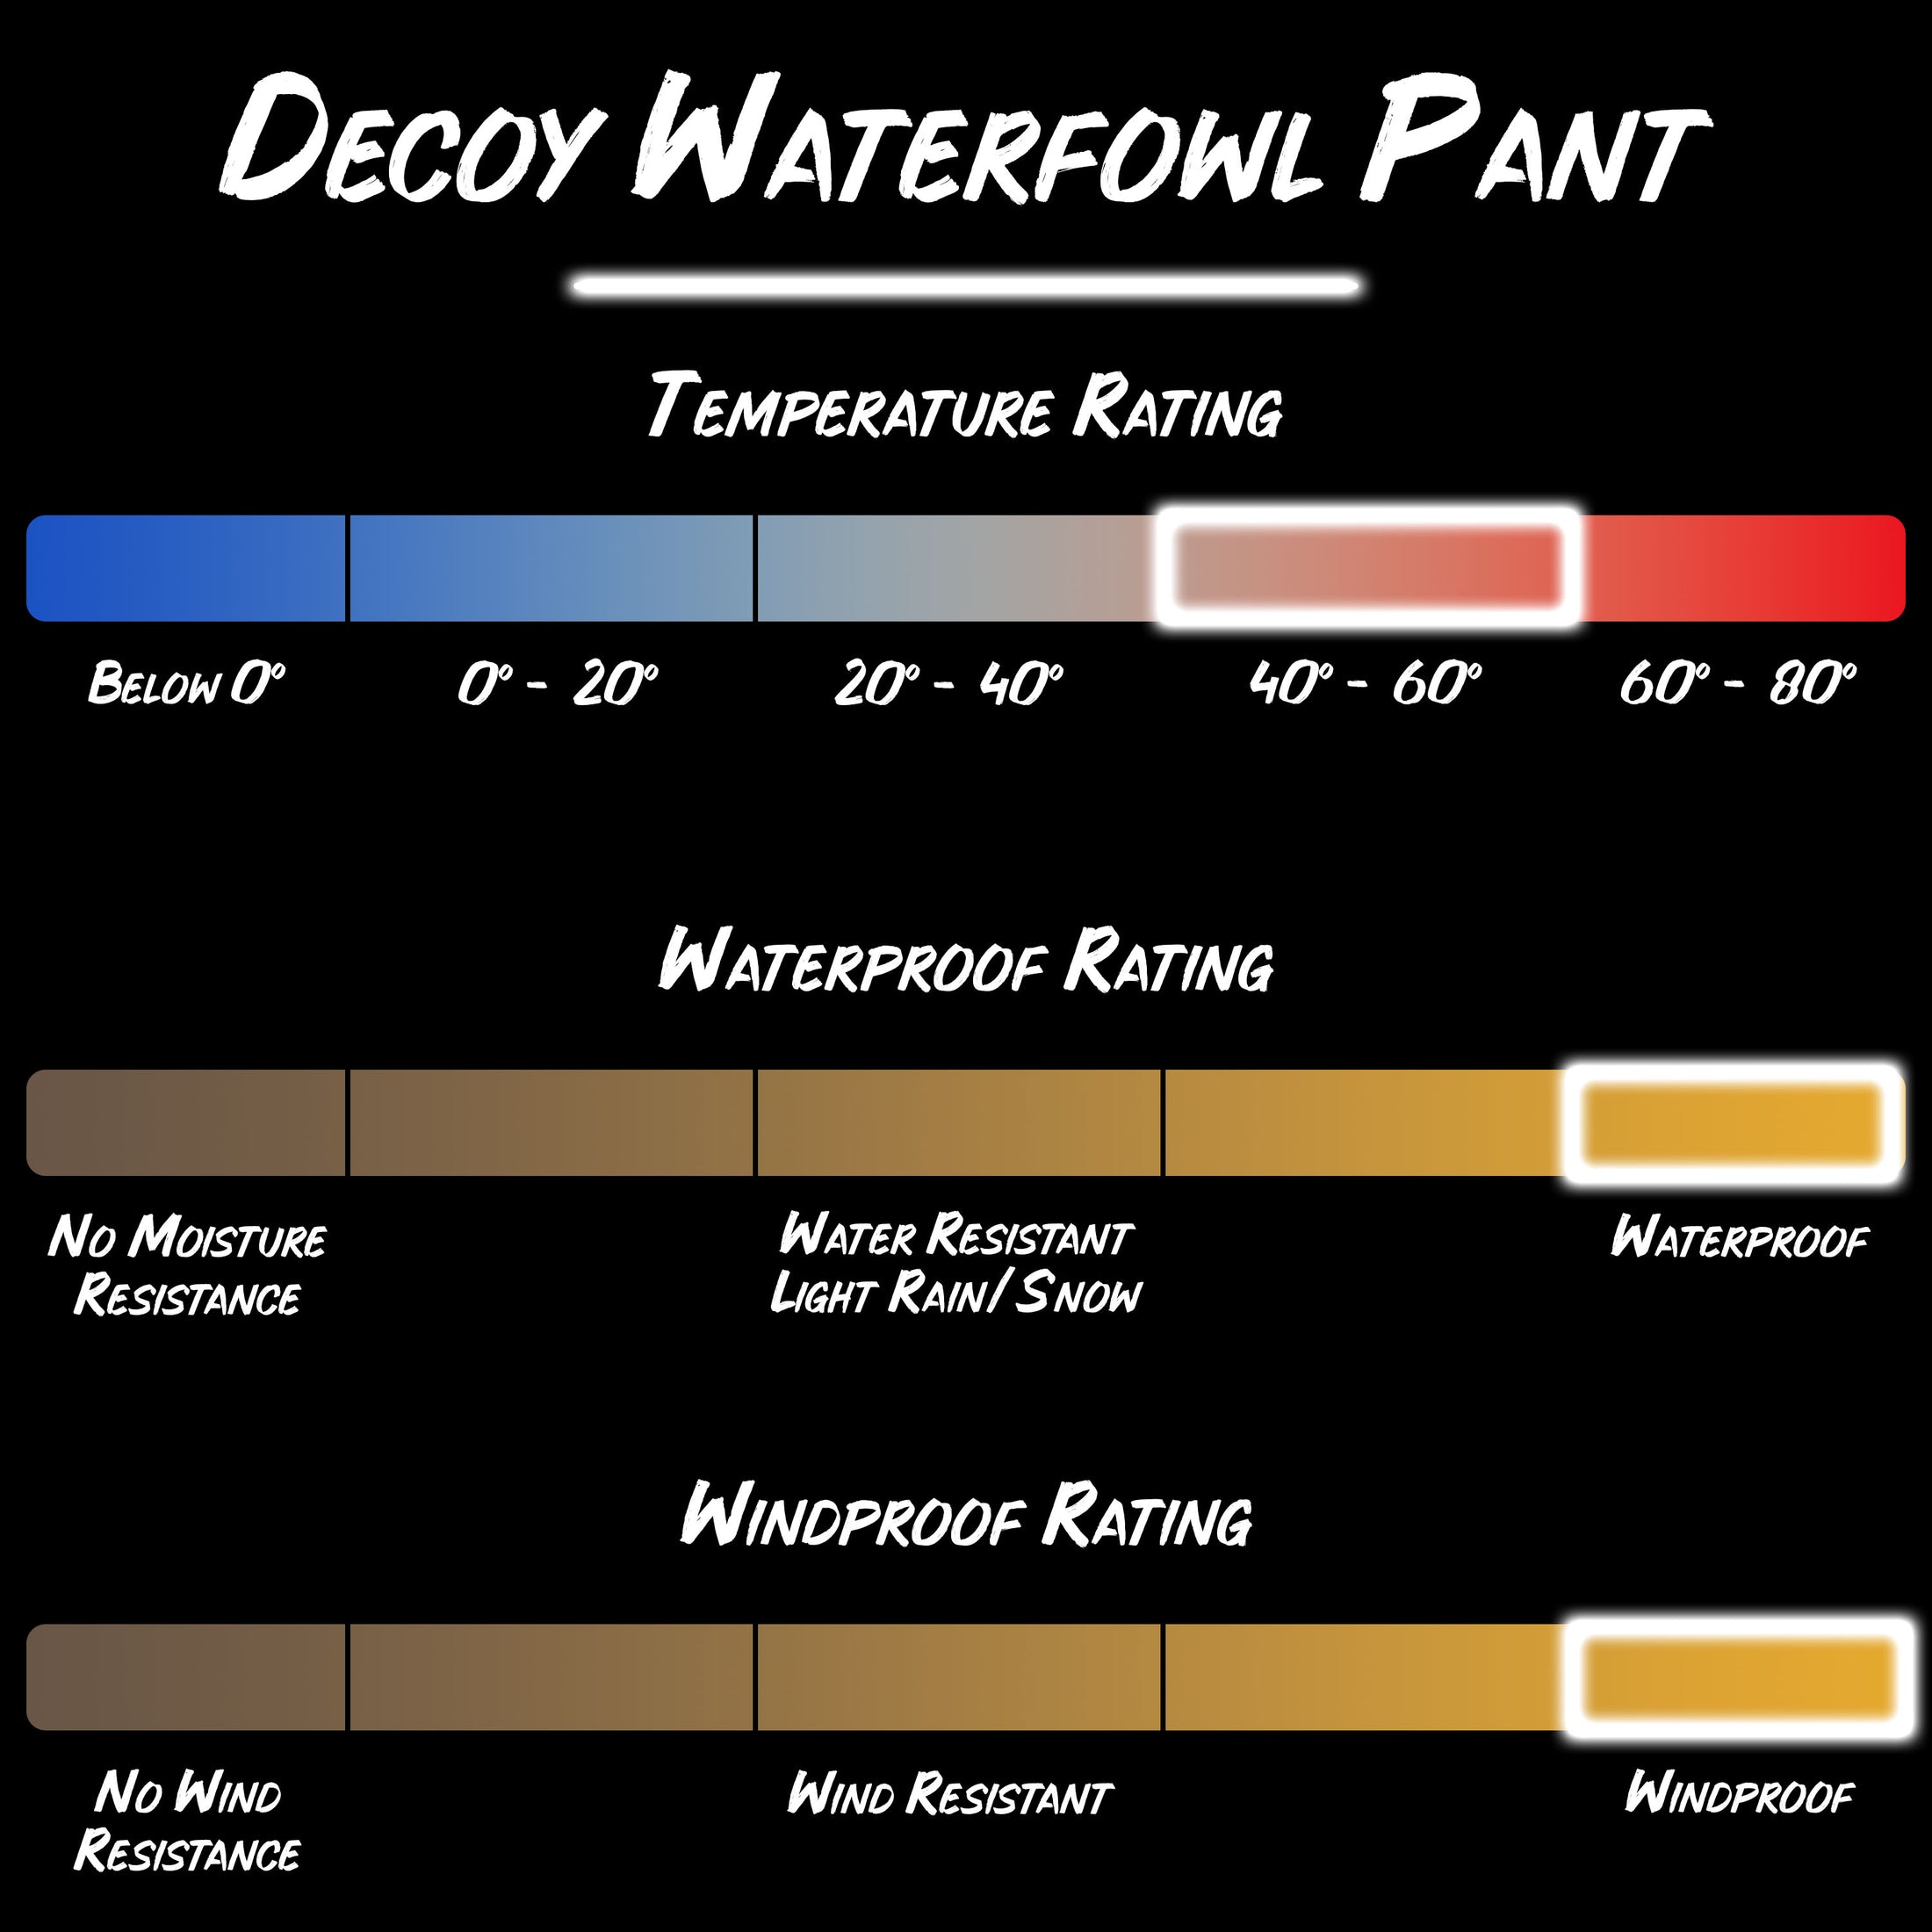 Decoy waterfowl pants product specifications.